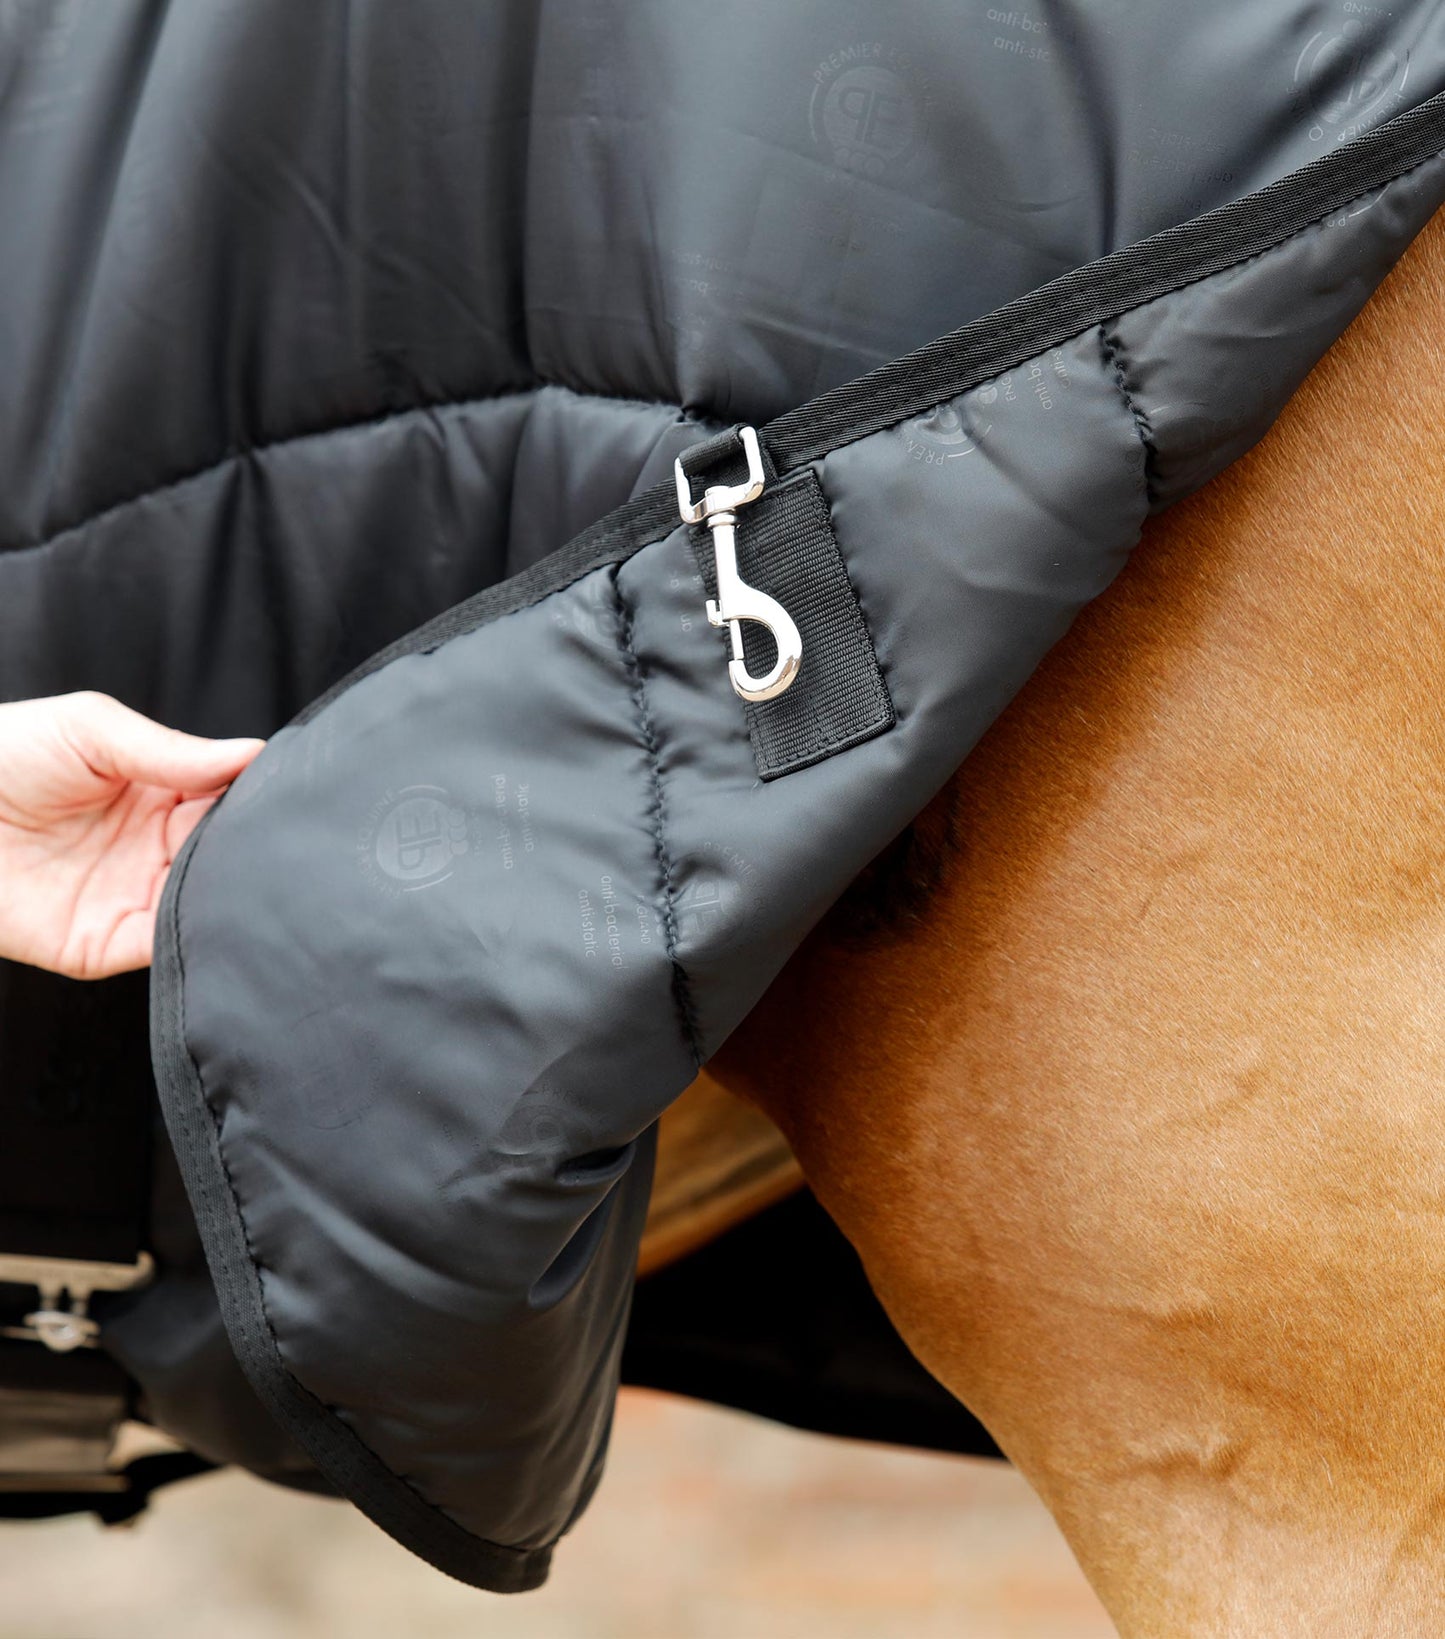 Premier Equine Combo Horse Rug Liners: 100g, 200g & 350g